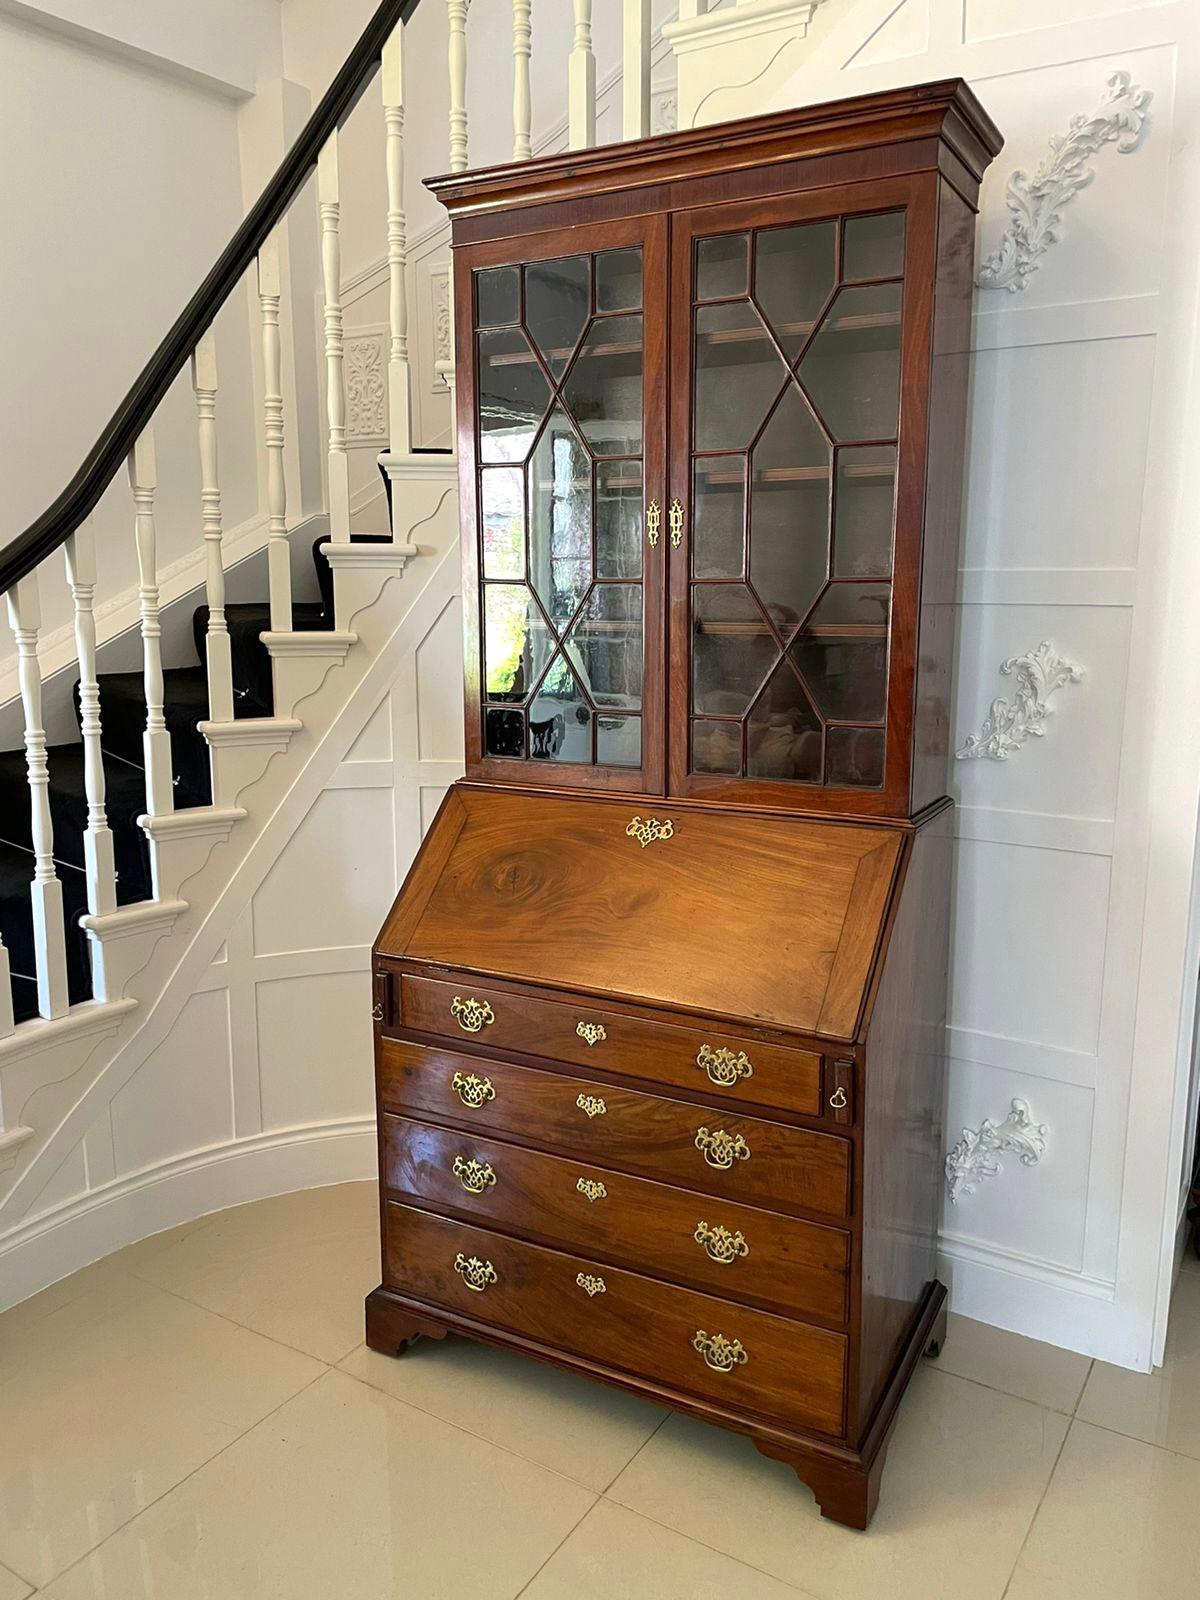 Antique George III quality mahogany bureau bookcase having a shaped moulded cornice with a mahogany frieze above a pair of quality mahogany astral glazed doors opening to reveal three shelves and boasts the attractive original brass escutcheons. The